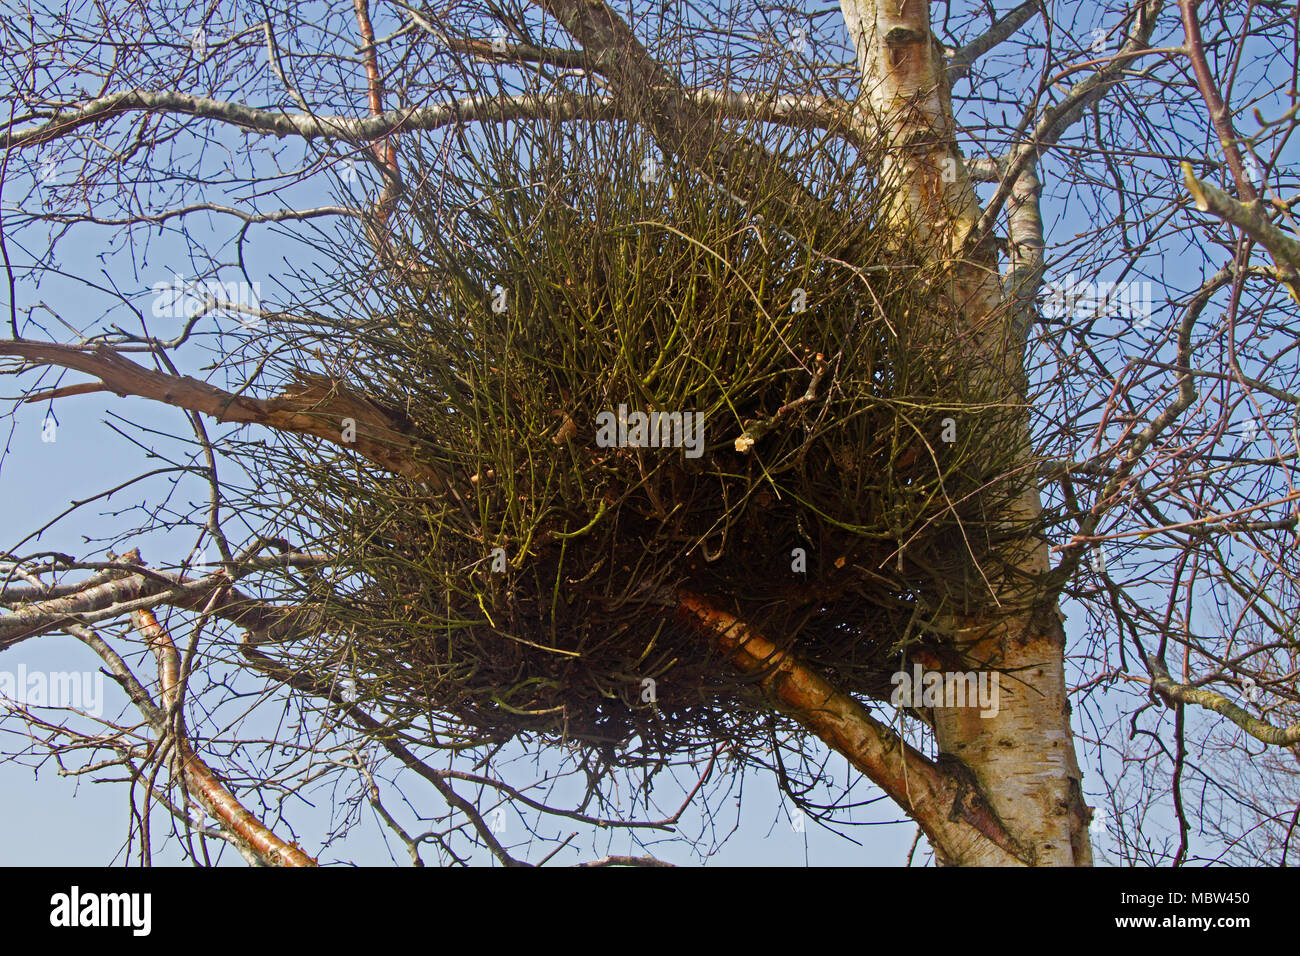 Witches' broom, a deformity caused by a fungus, in a Birch tree Stock Photo